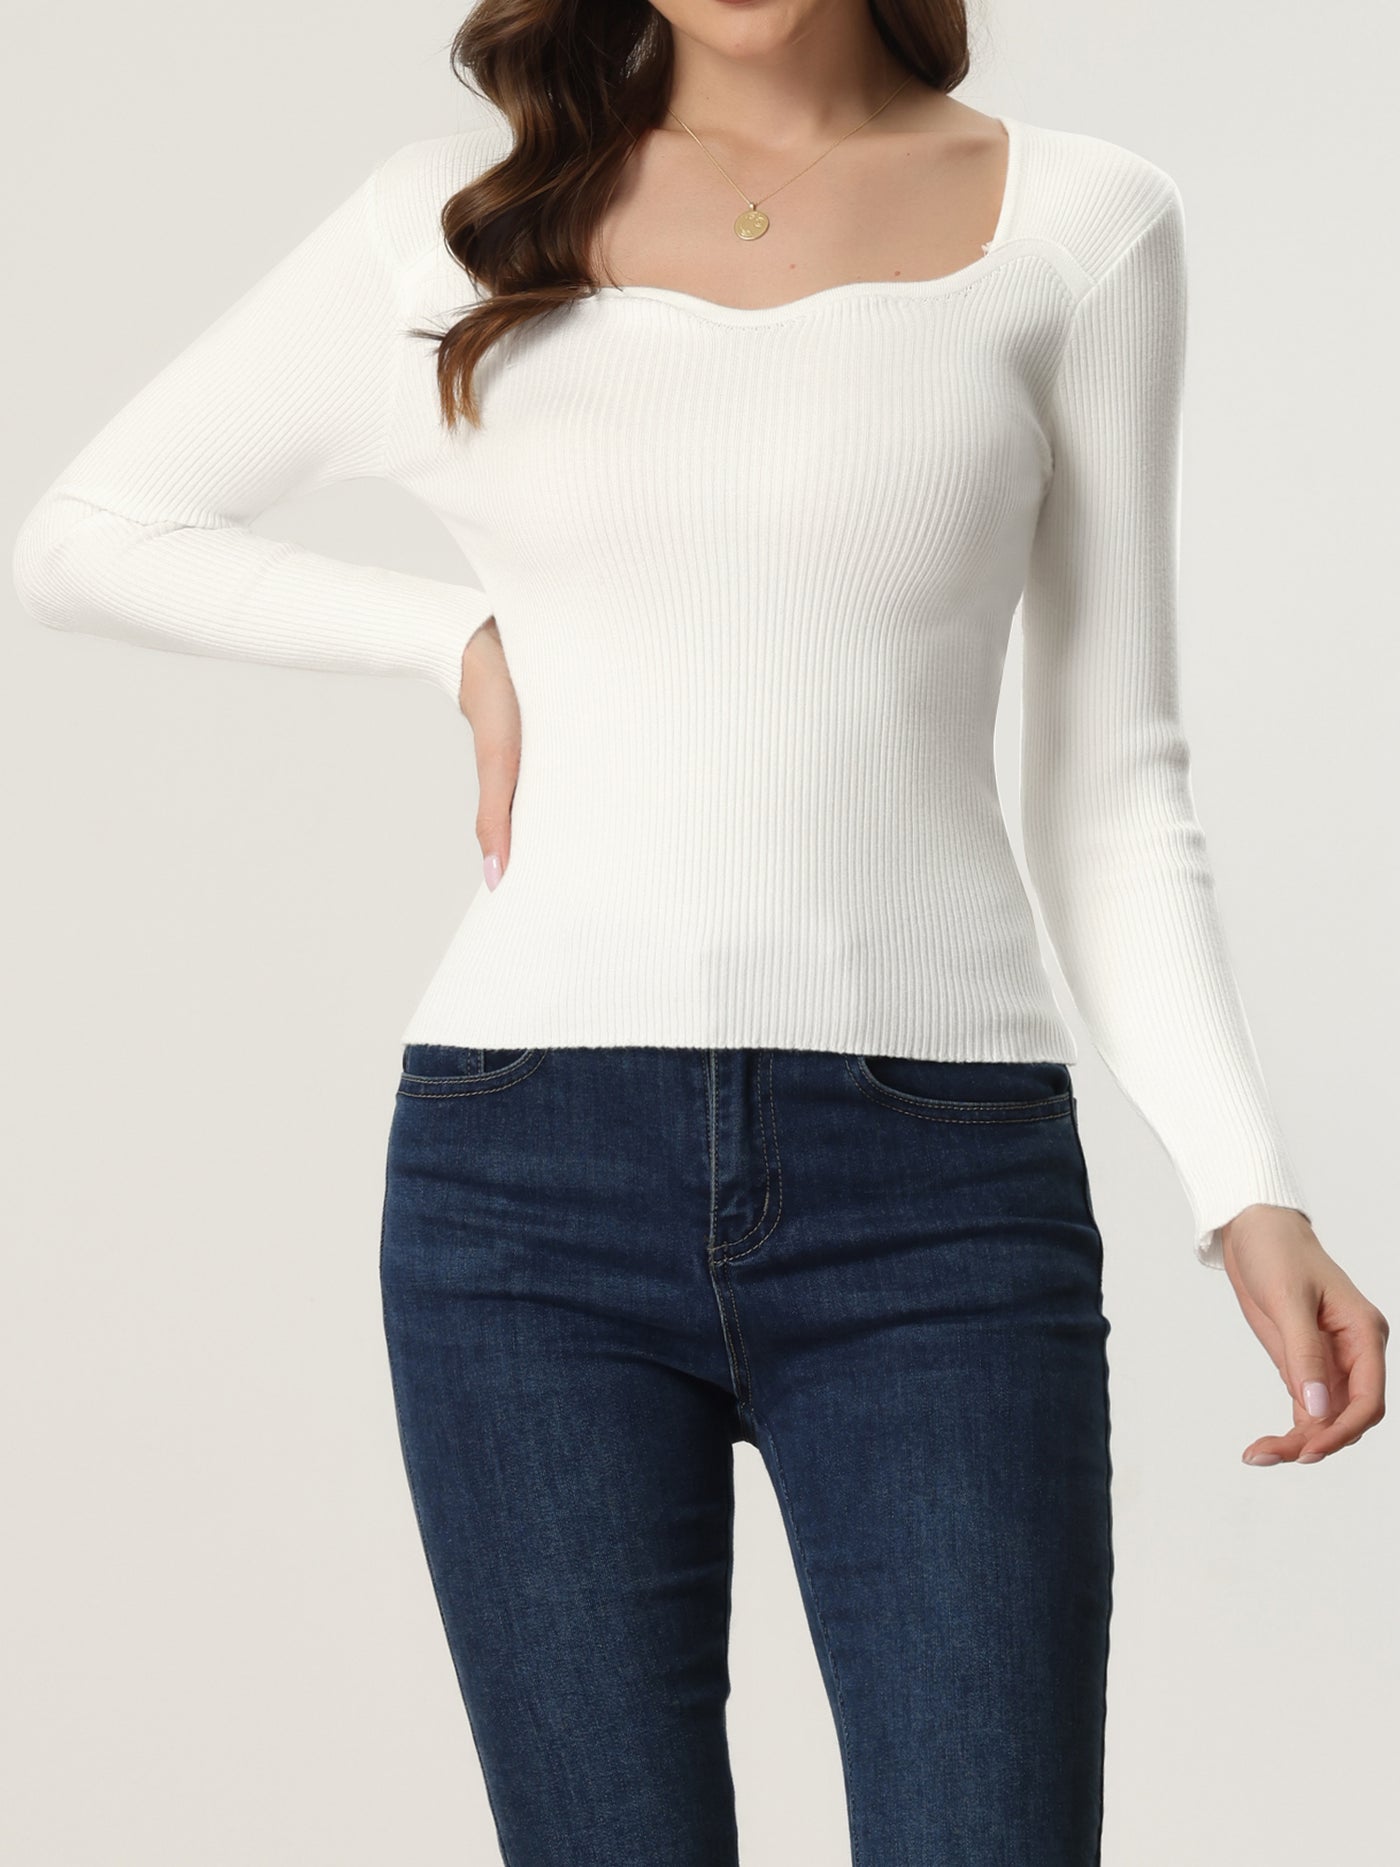 Allegra K Sweetheart Neck Casual Long Sleeve Slim Fit Pullover Sweater